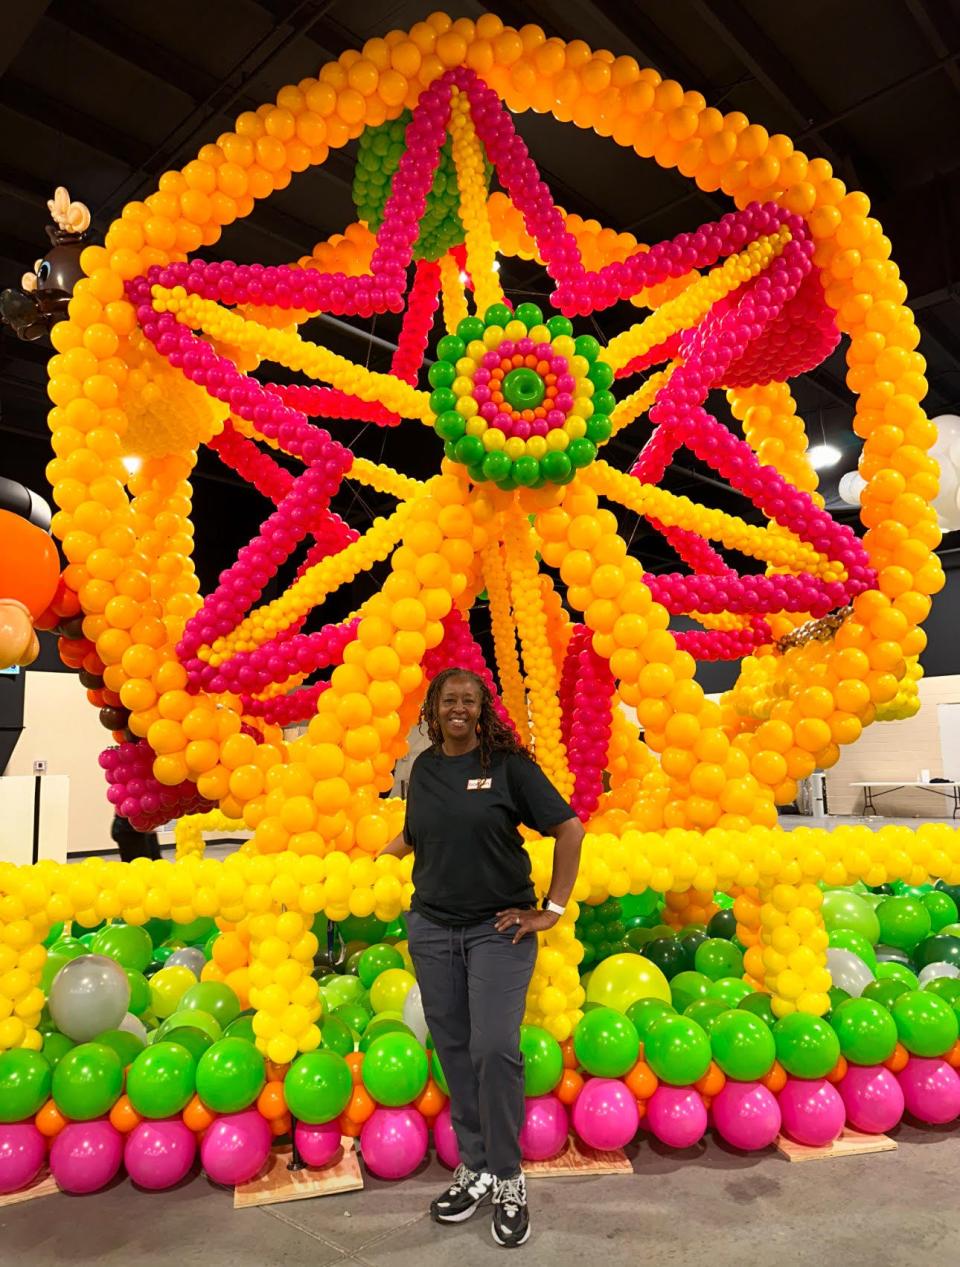 As one of 70 elite balloon artists selected to participate, Celebration Creations owner Stephanie Cofield-Mixon poses with the Ferris wheel she created in support of Ronald McDonald House at the recent "Big Balloon Build"' in Indiana in April 2024.